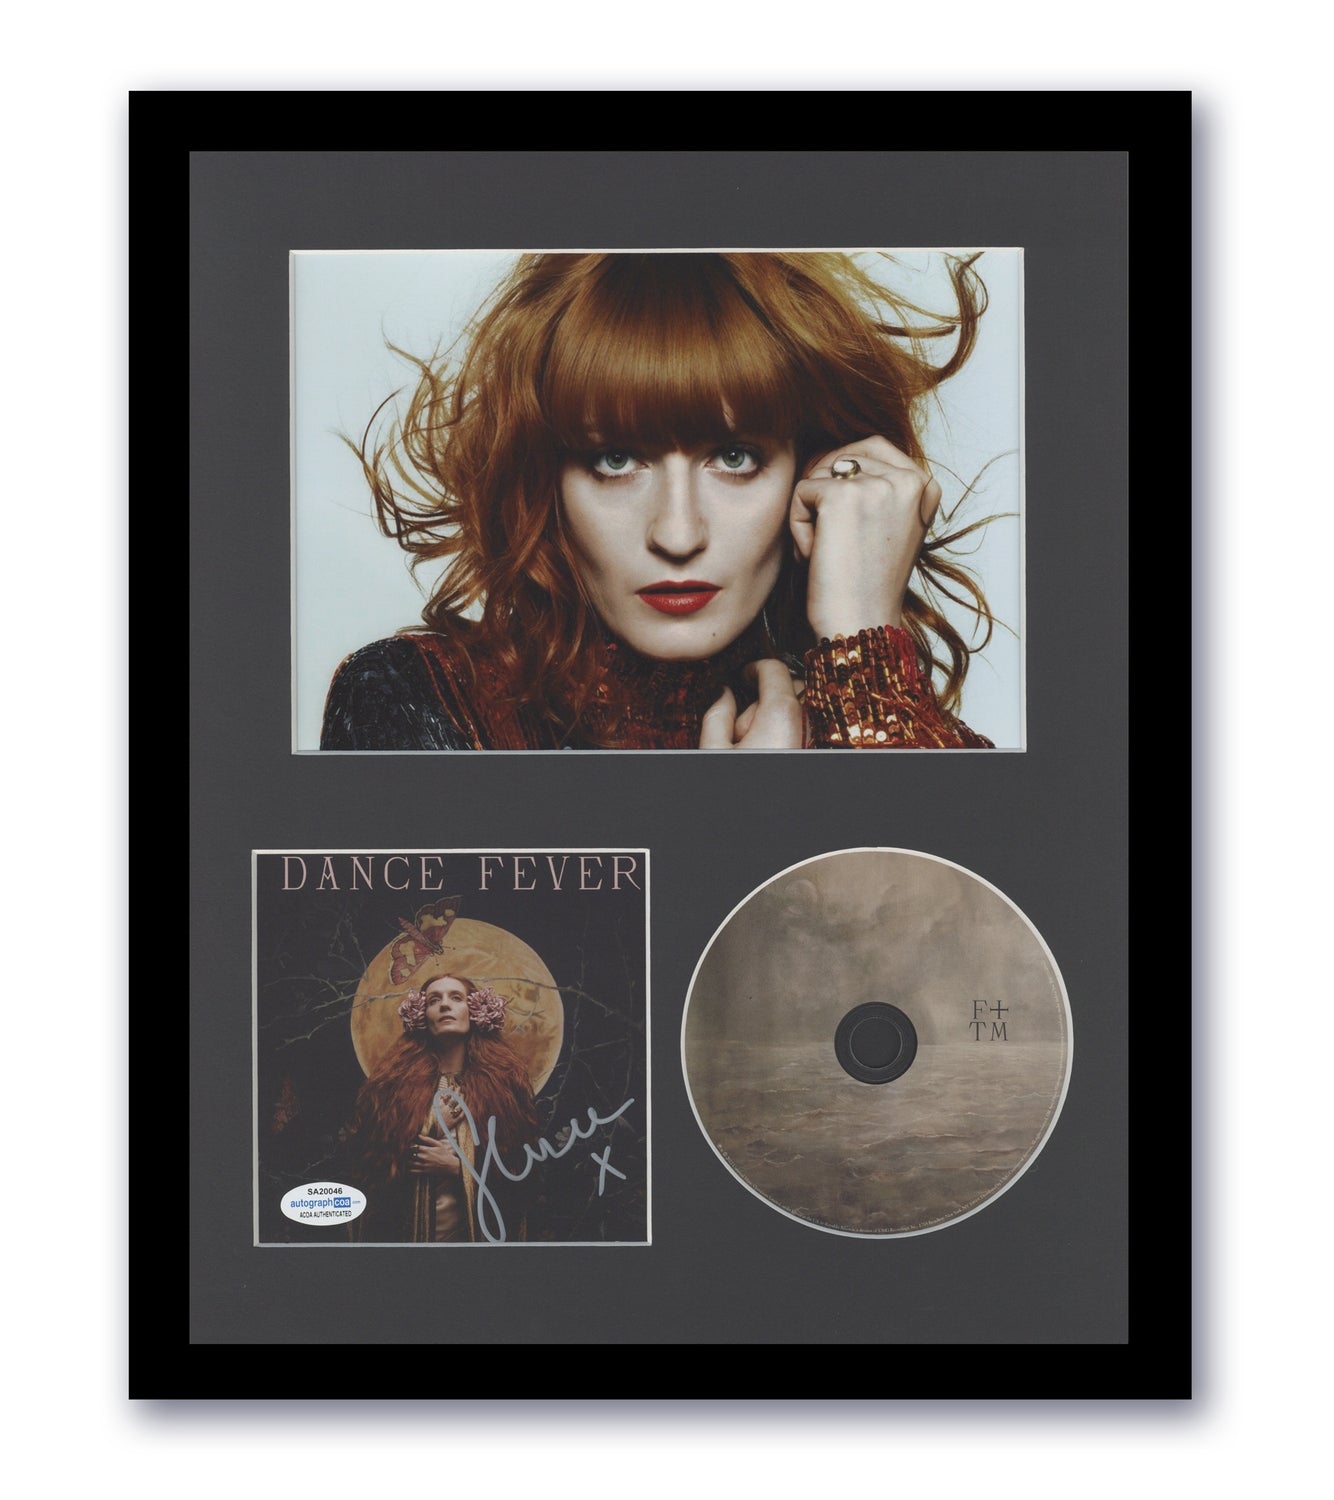 Florence Welch Signed 11x14 Framed CD Dance Fever Autographed ACOA 2